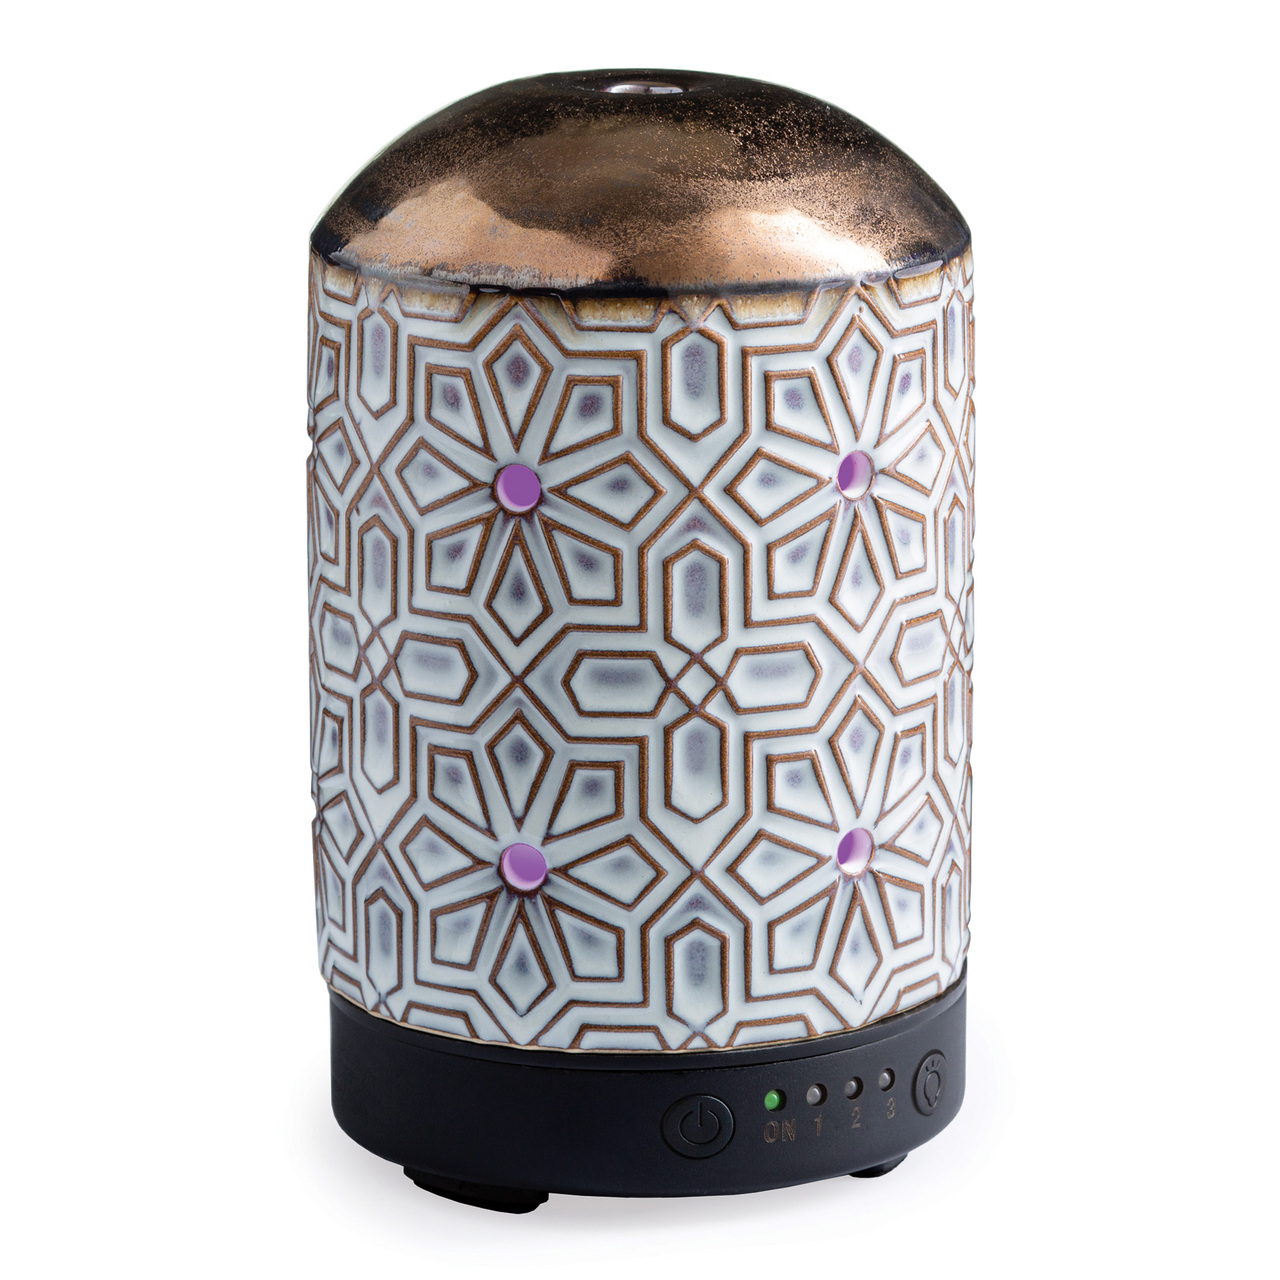 Ultrasonic Aromatherapy Diffuser - LED Light Levels and Timer Settings